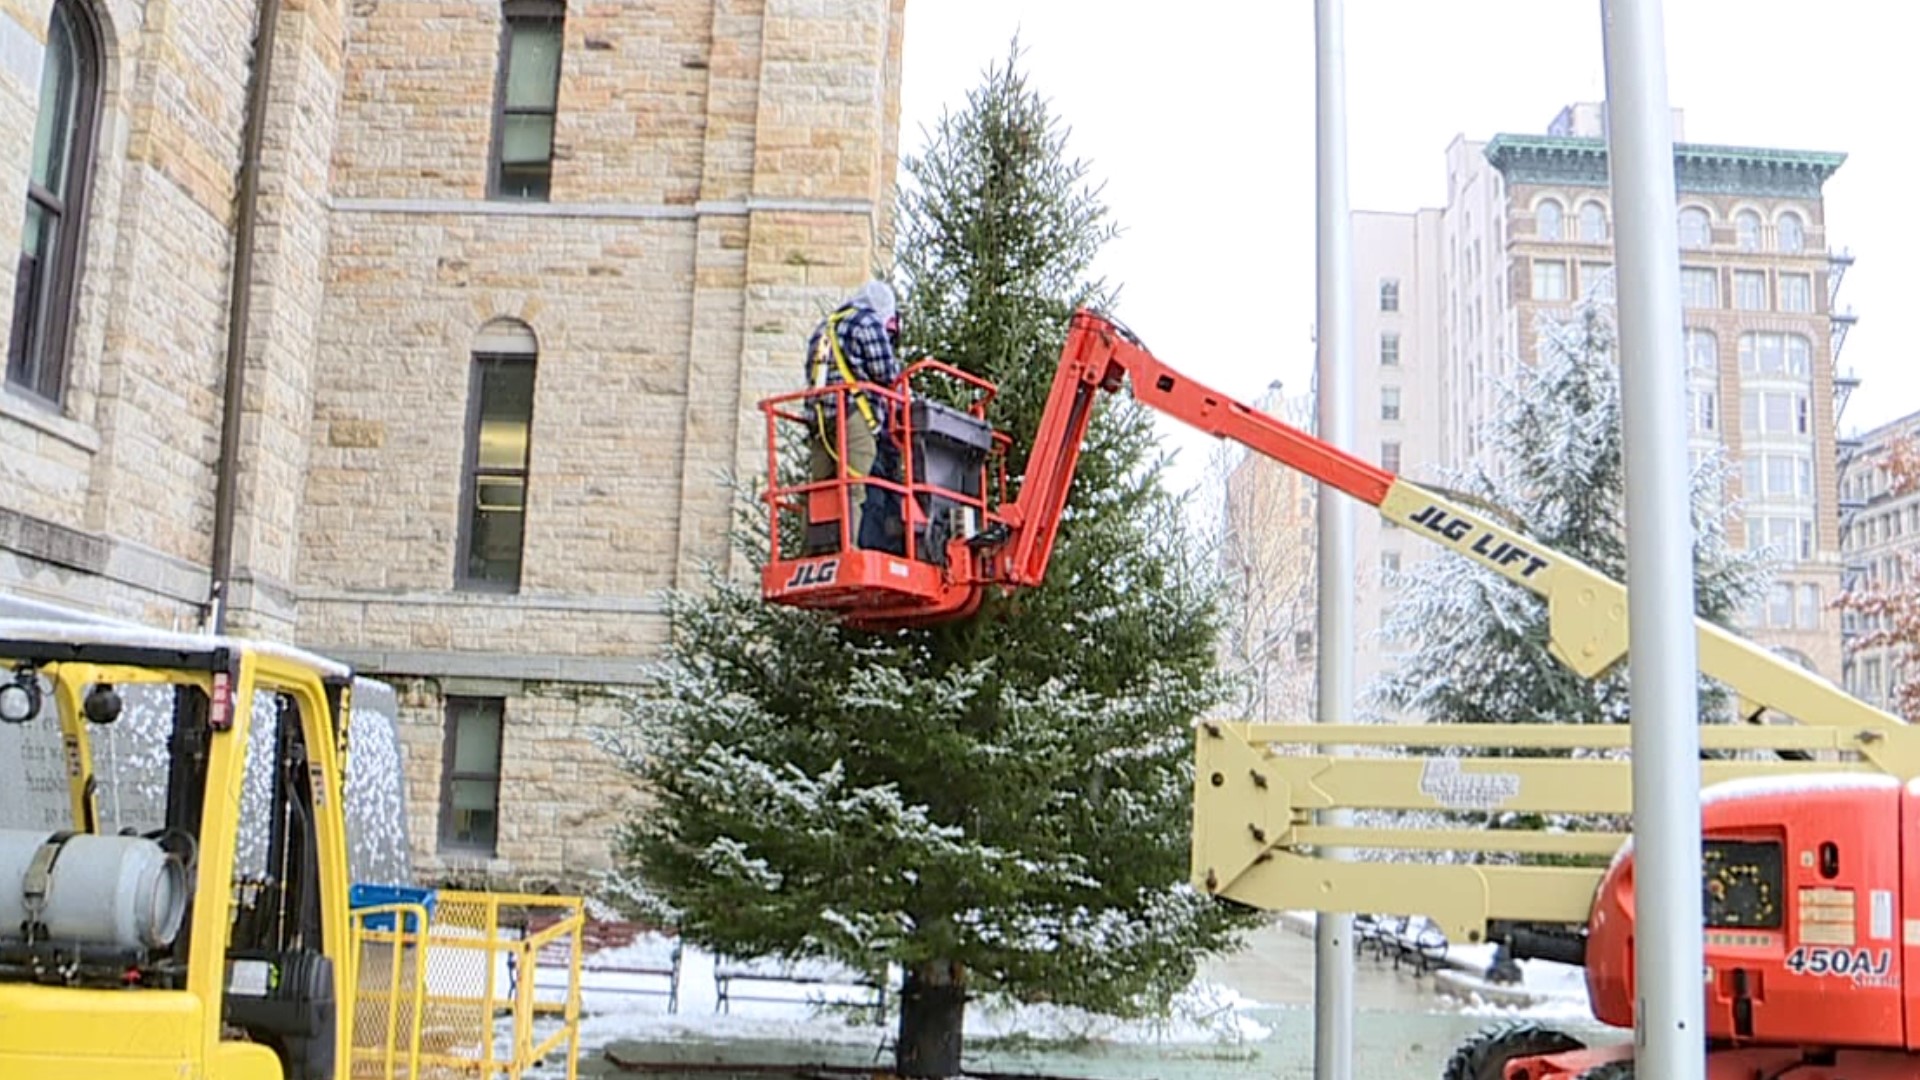 The tree arrived in Courthouse Square in Scranton on Tuesday.